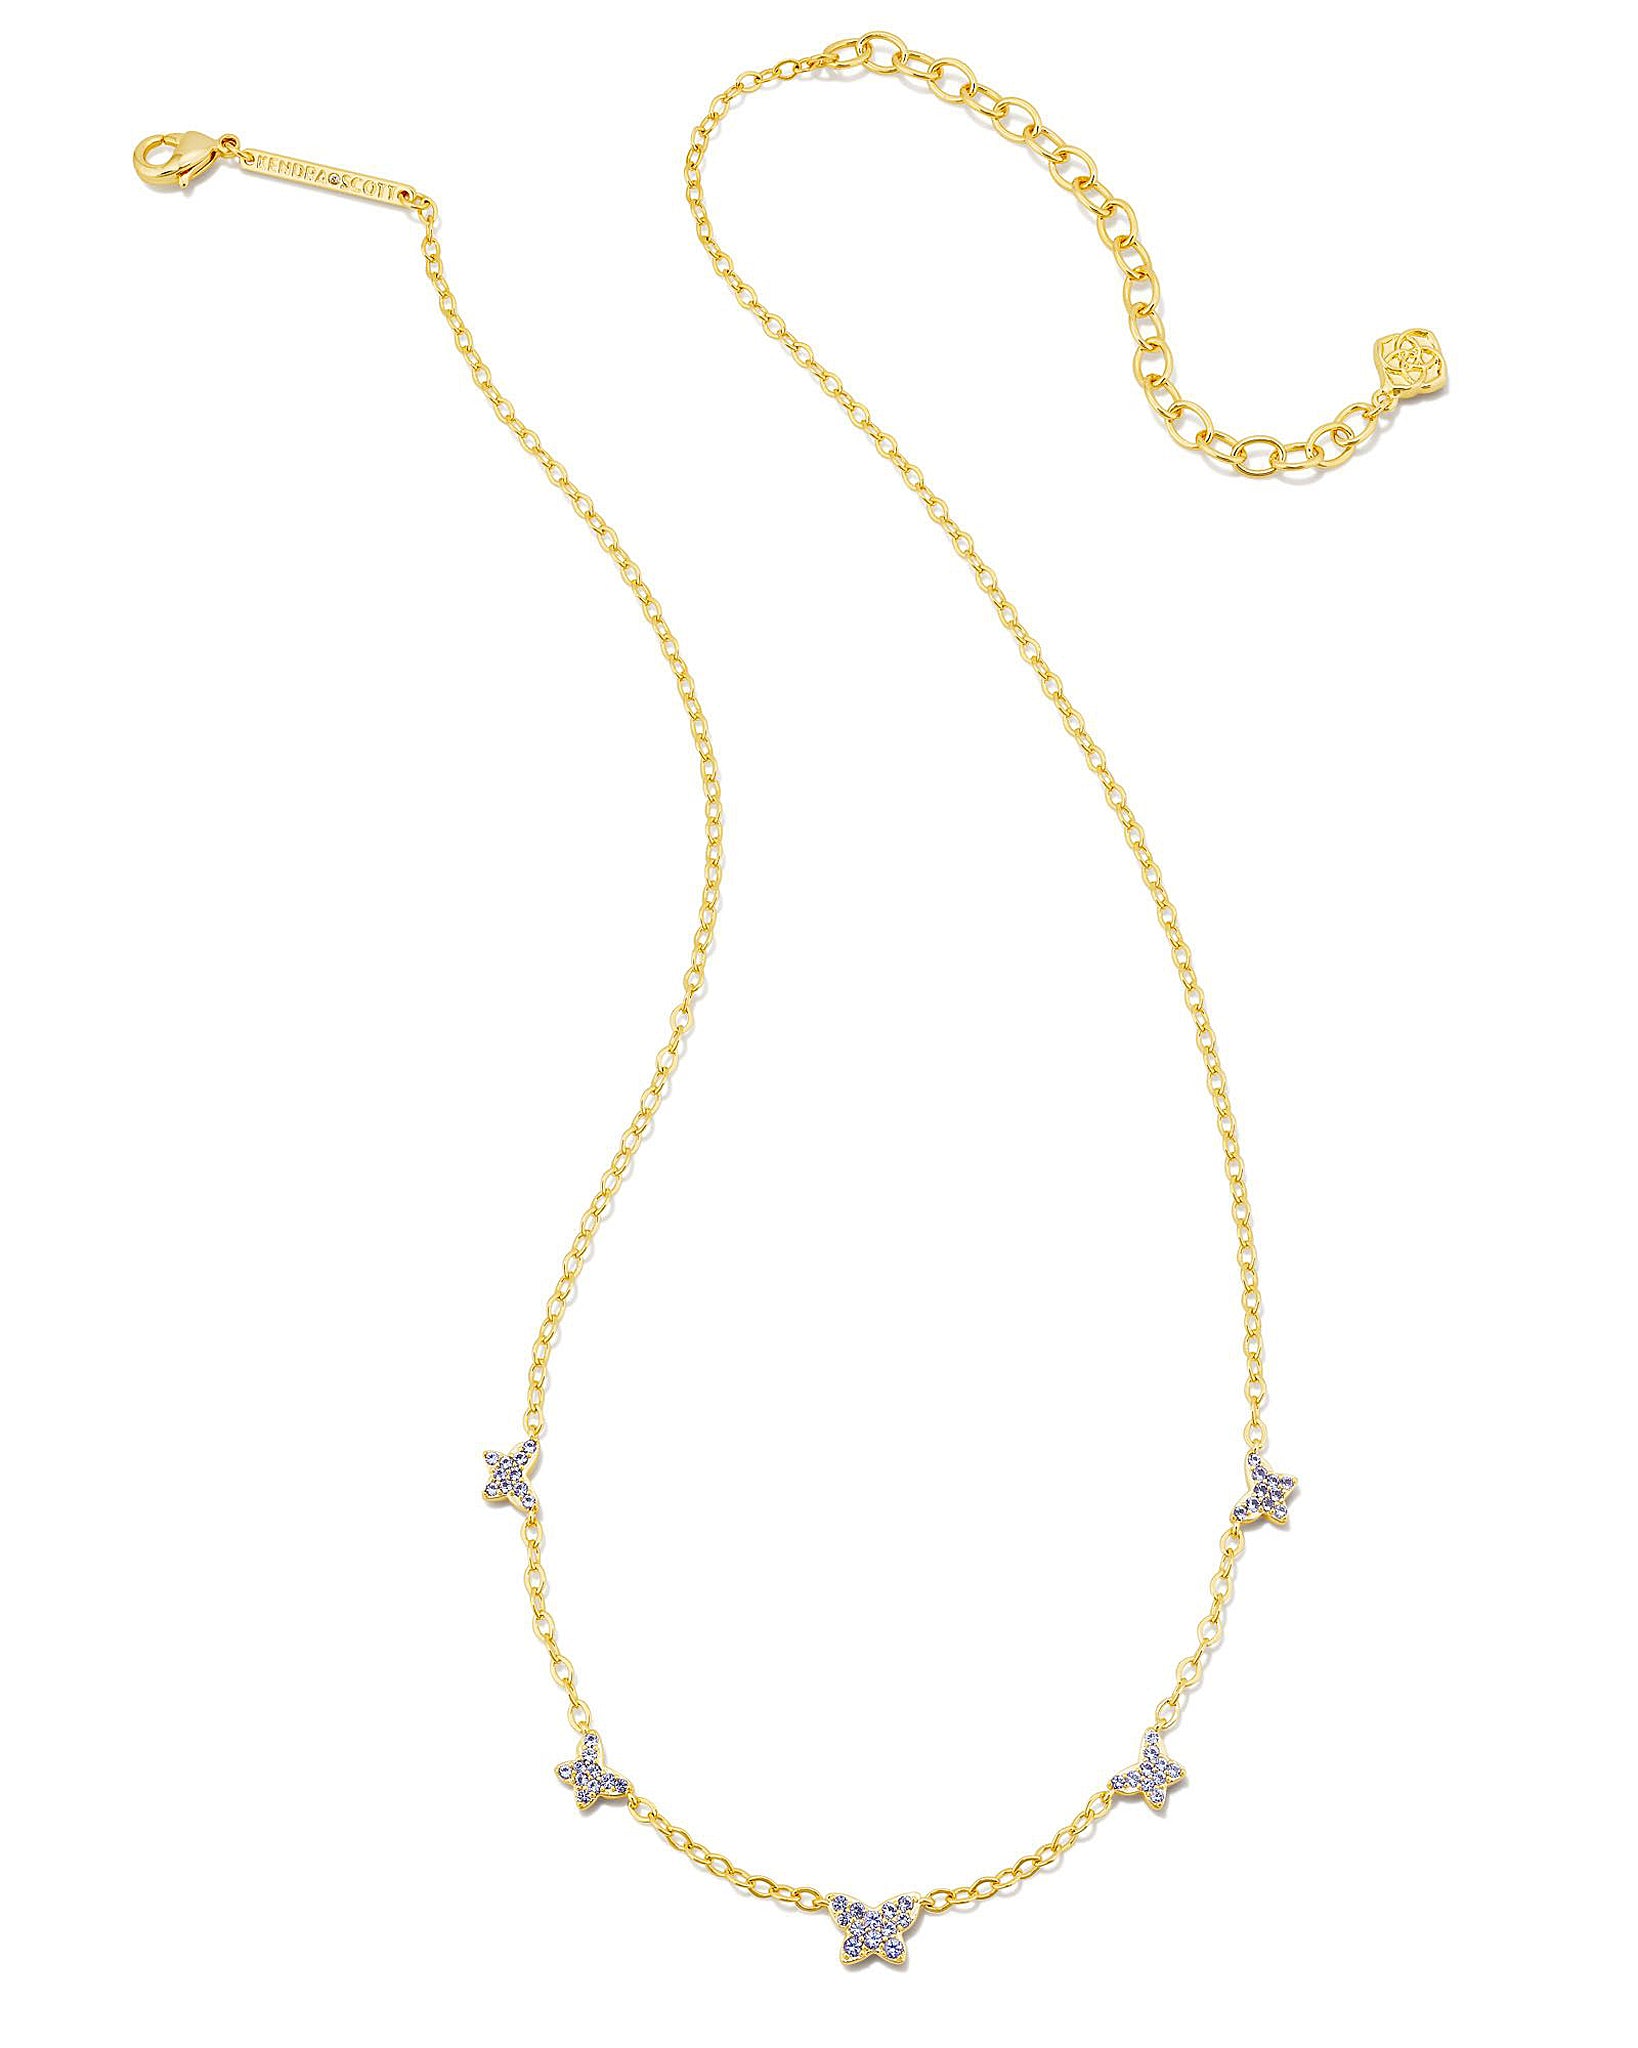 Kendra Scott Lillia Butterfly Strand Necklace in Violet Crystal and Gold Plated